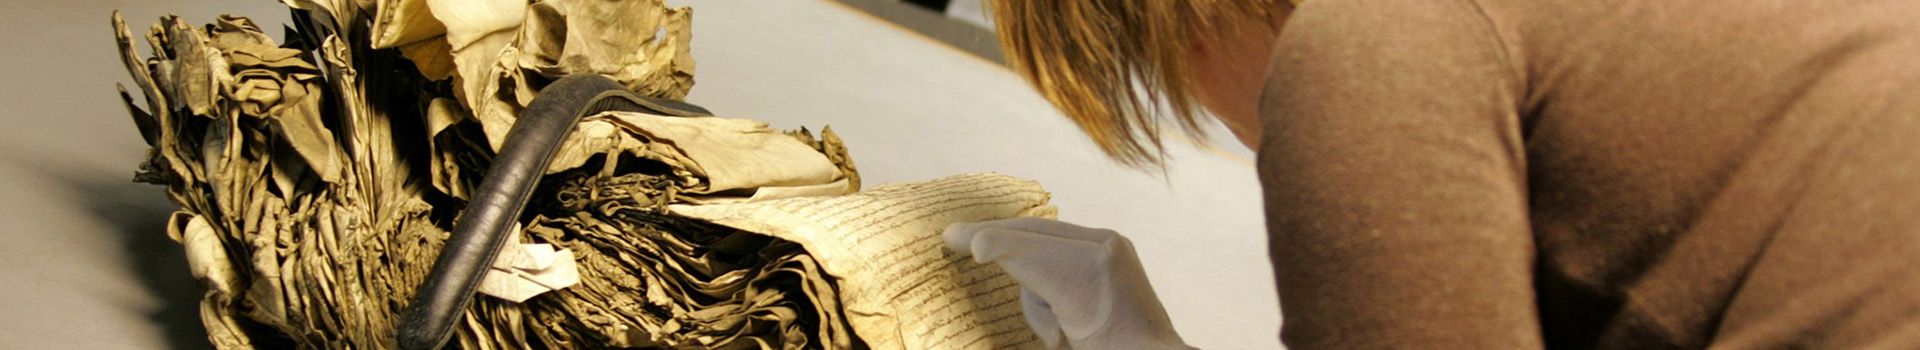 A female archivist wears protective gloves to examine old manuscript records.